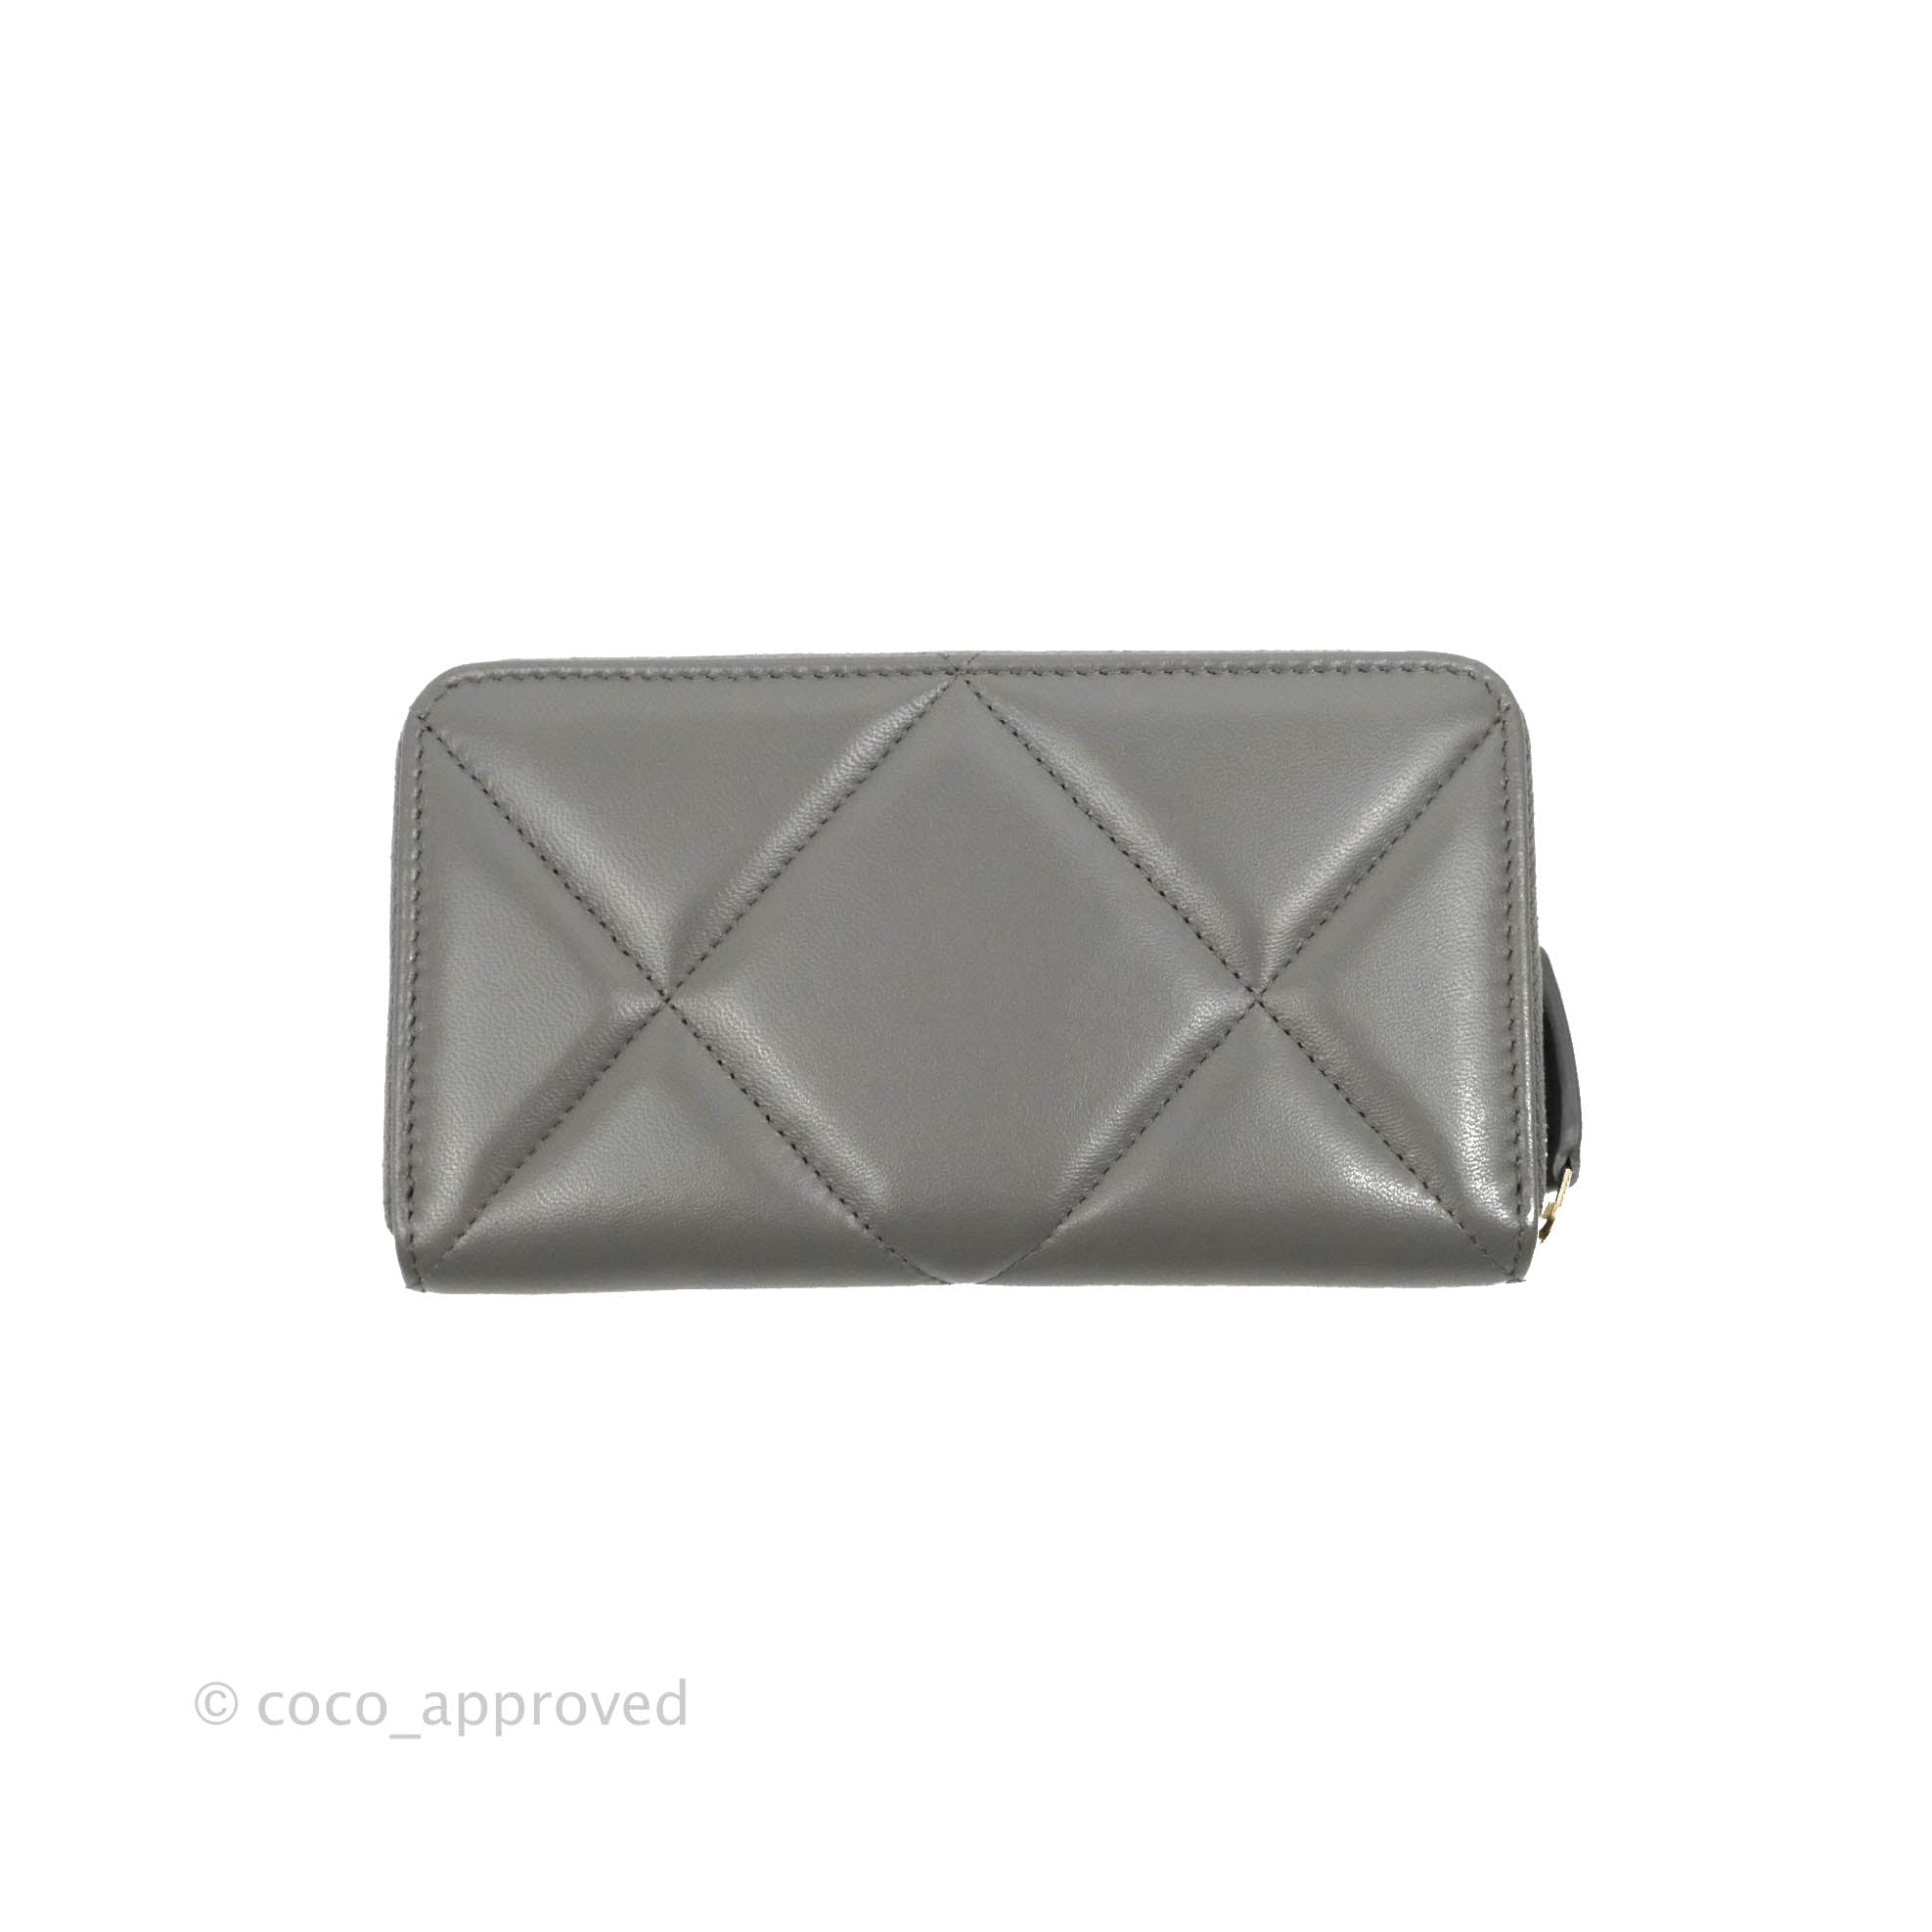 Chanel 19 Long Zipped Wallet Black in Goatskin with  Gold/Silver/Ruthenium-tone - US